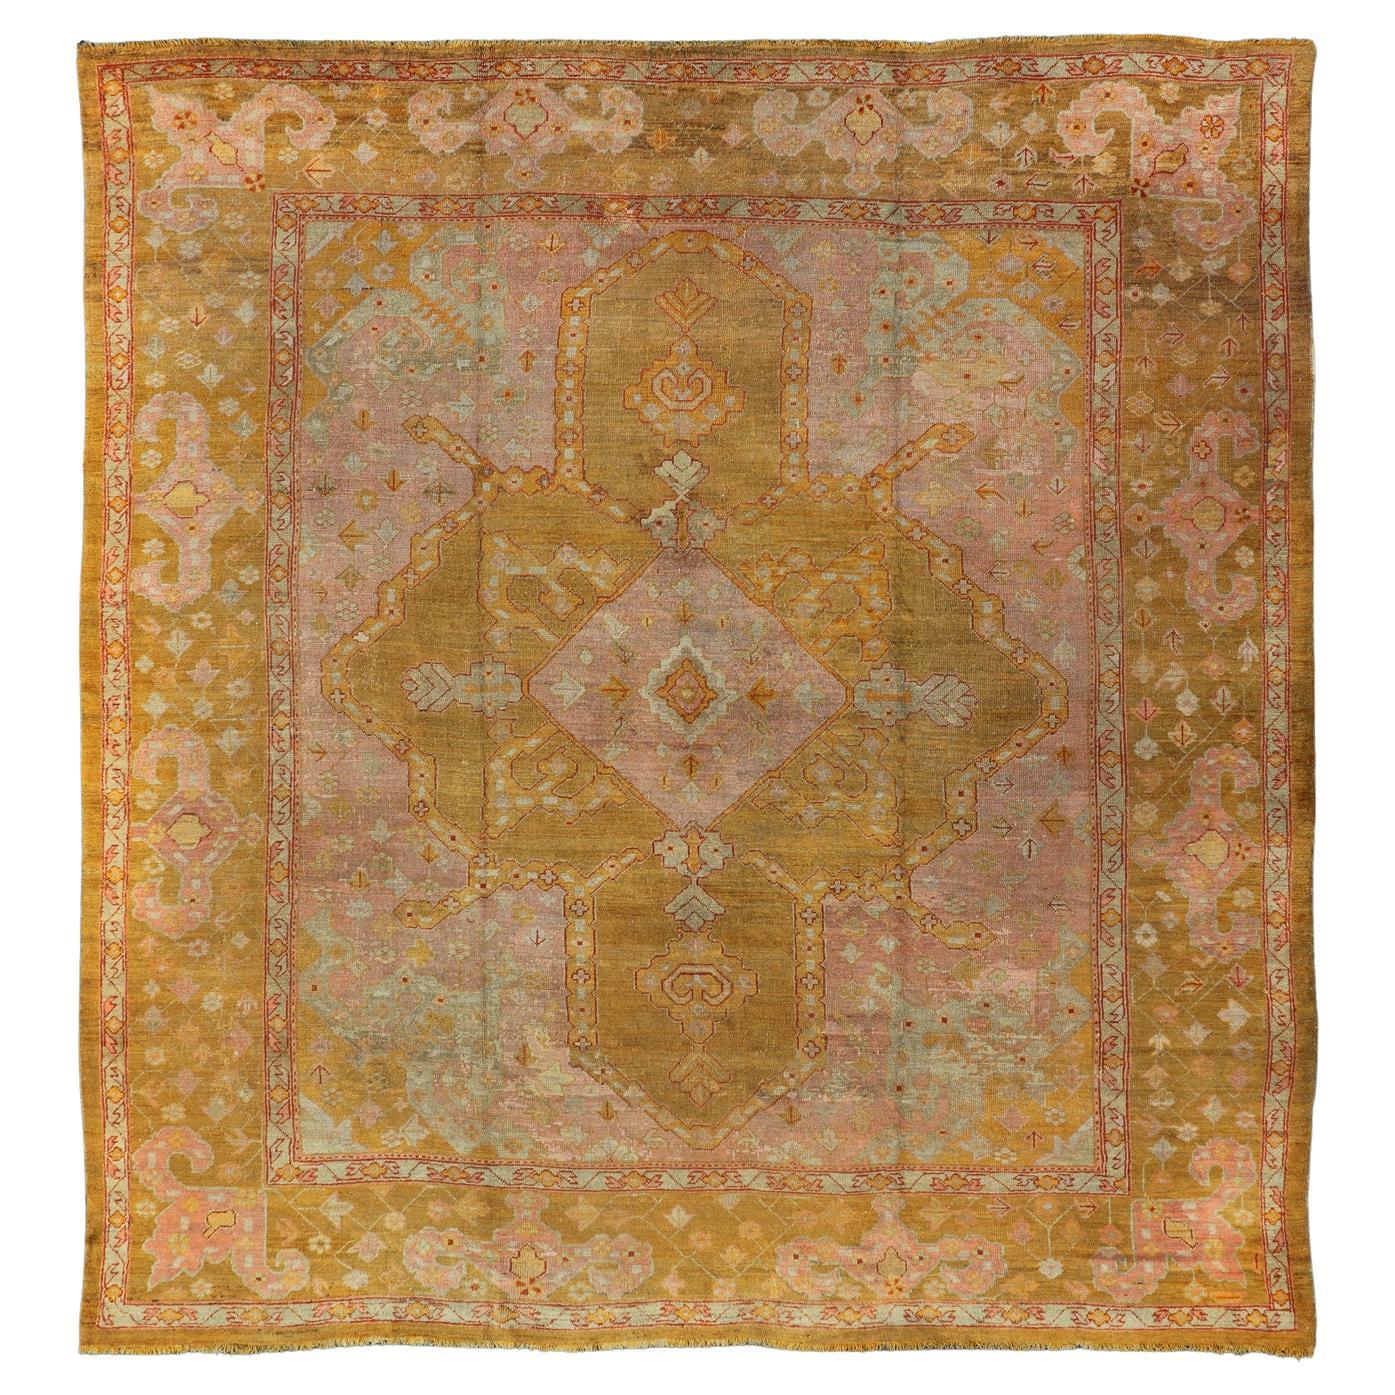 Squared Shape Antique Oushak Rug in Green, Marigold, Cream and Pink Color  For Sale